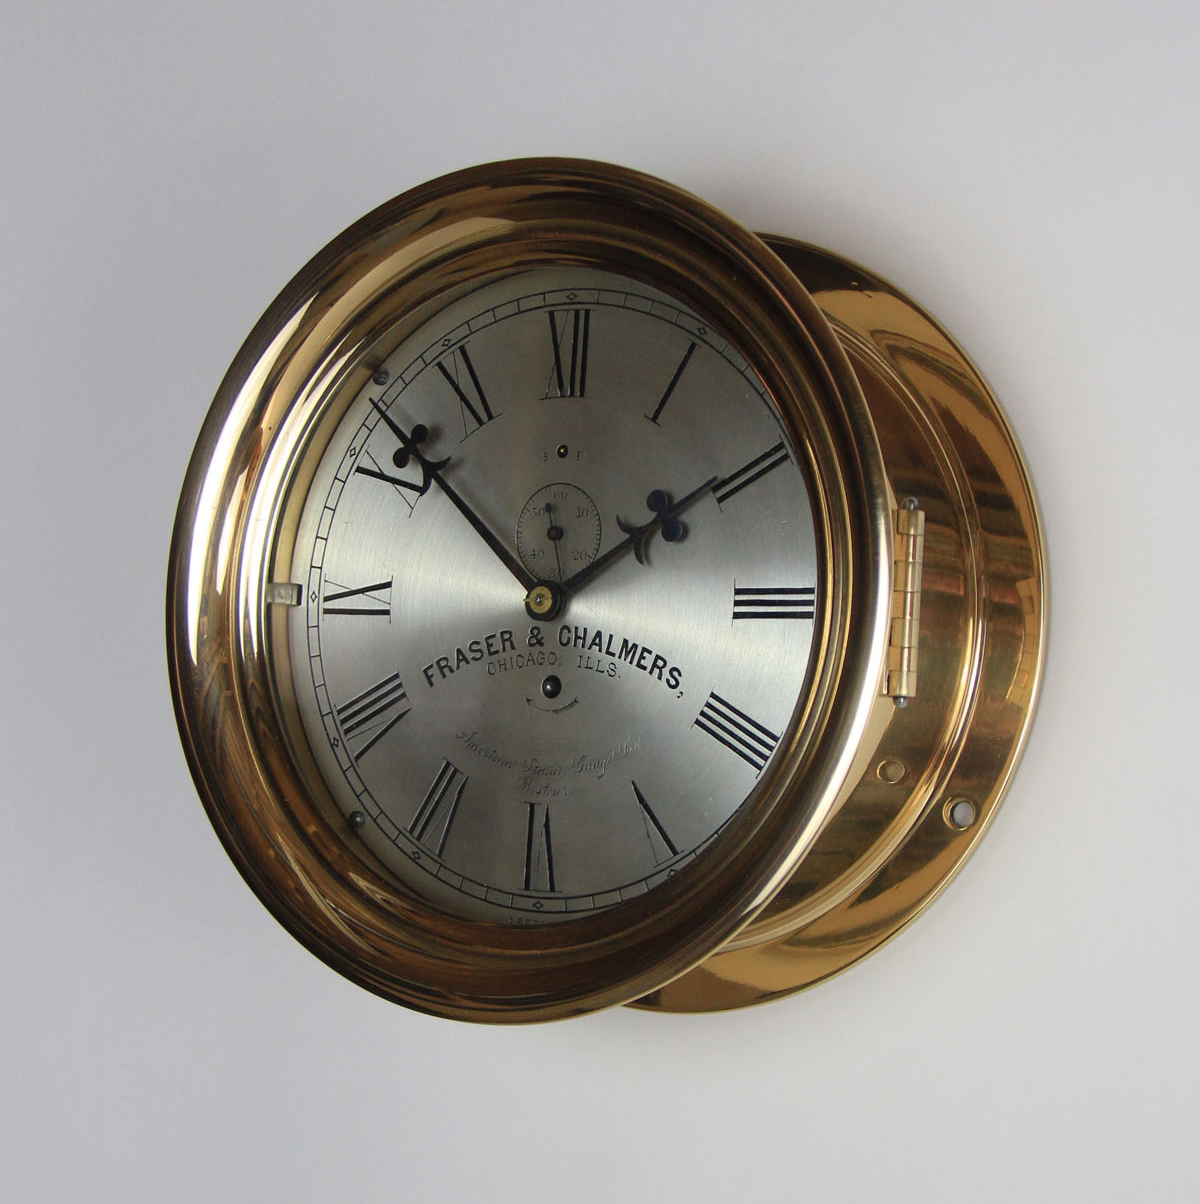 E. Howard 8 1/2 inch Marine Clock for Fraser Chalmers